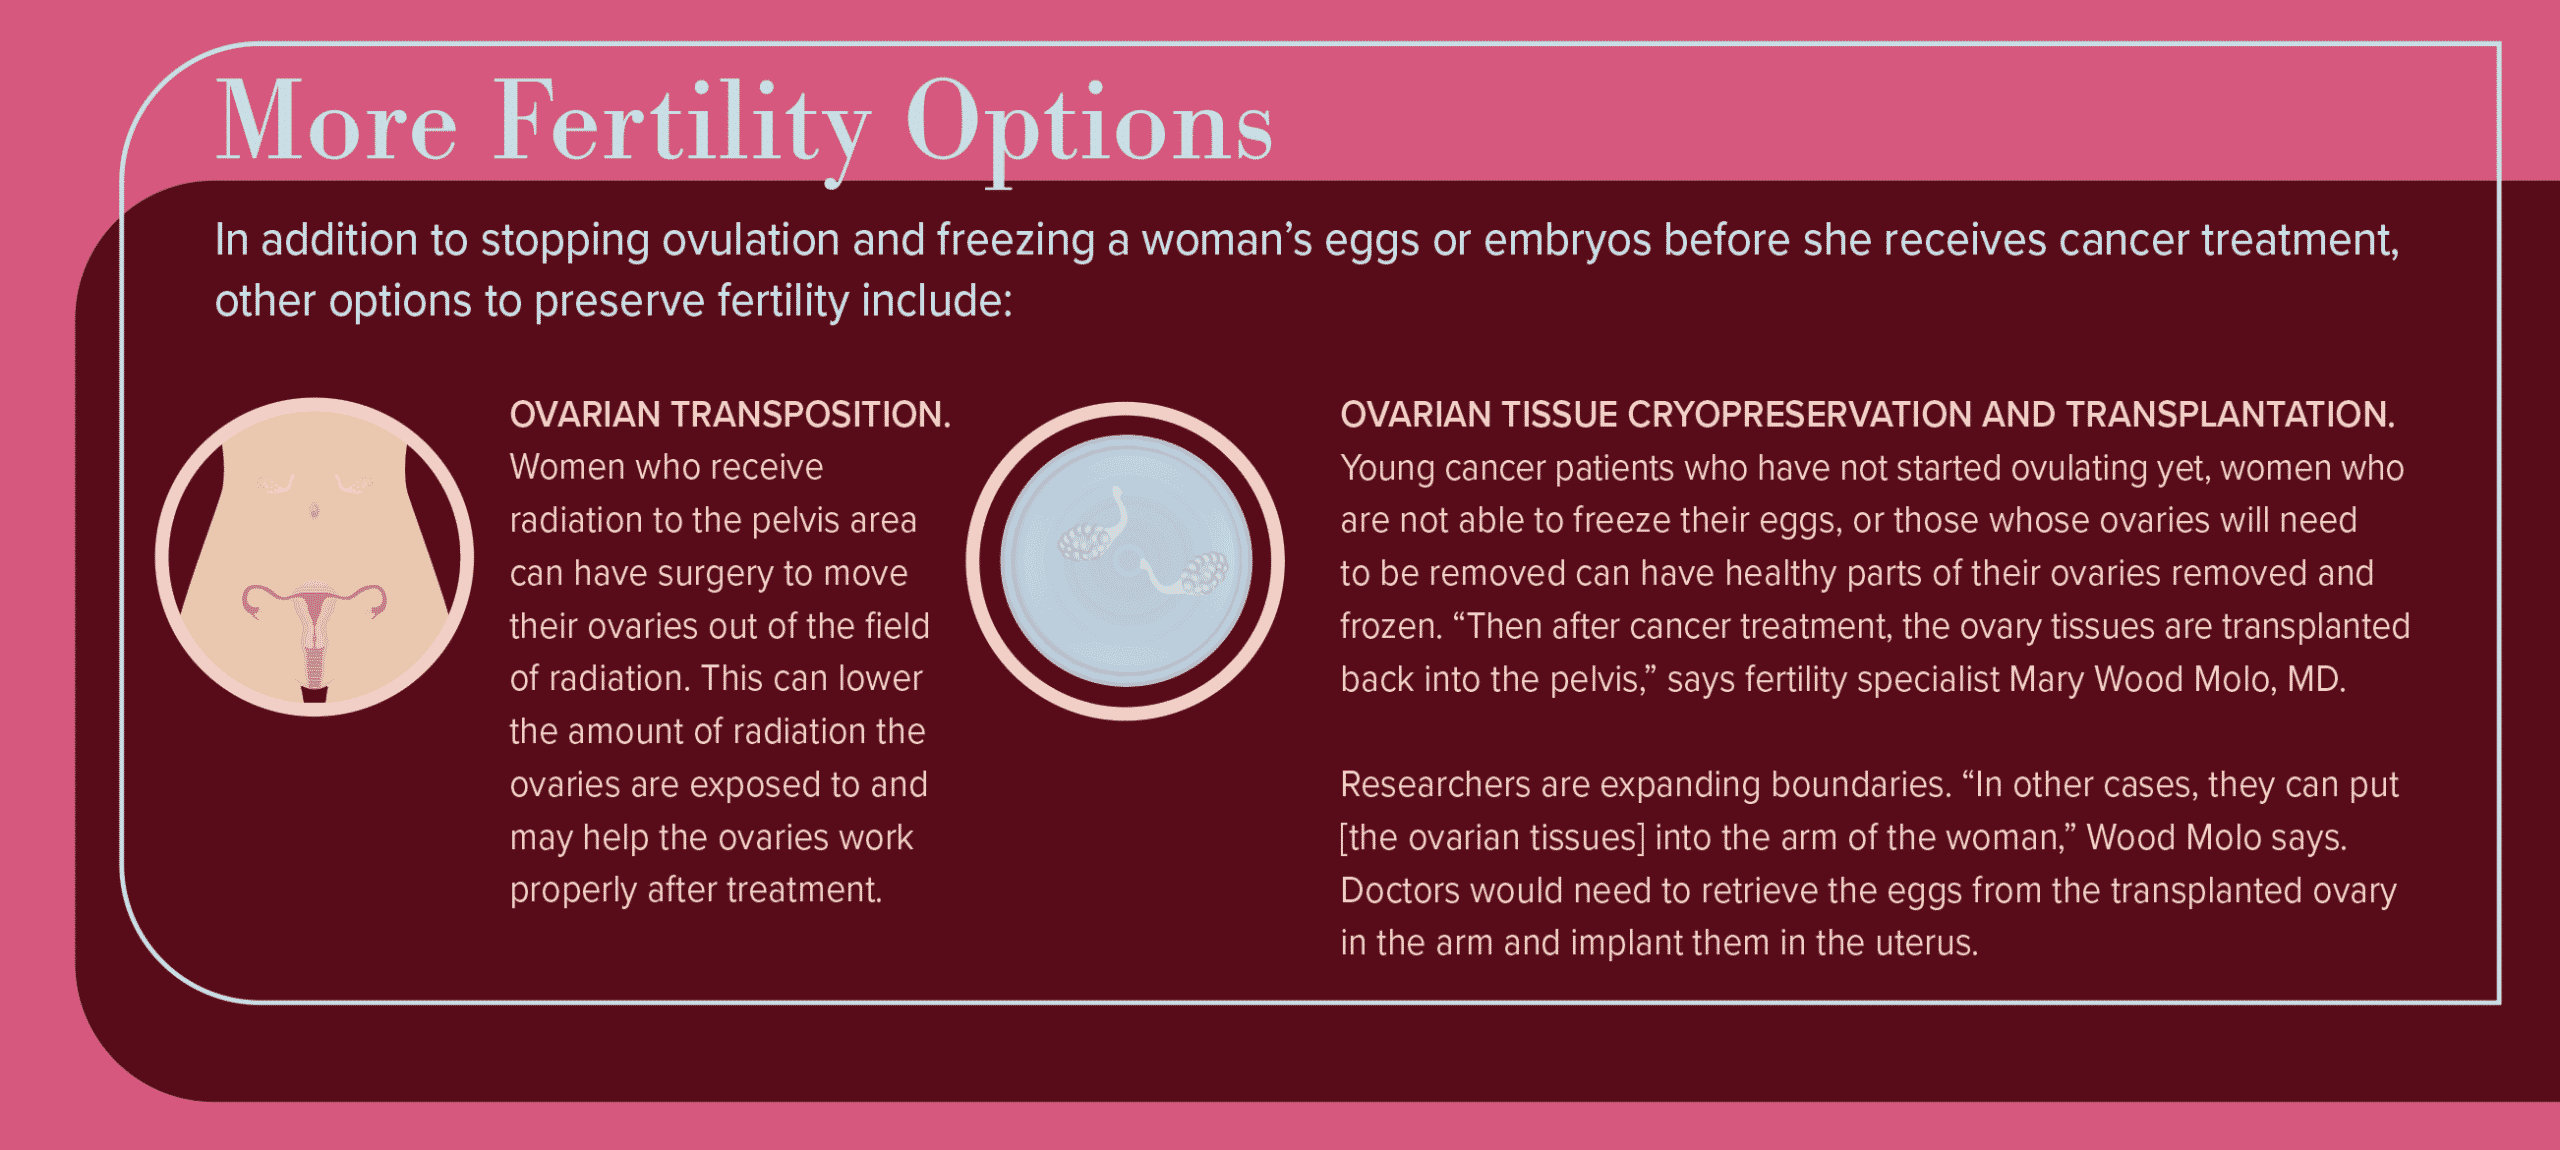 More Fertility Options Infographic